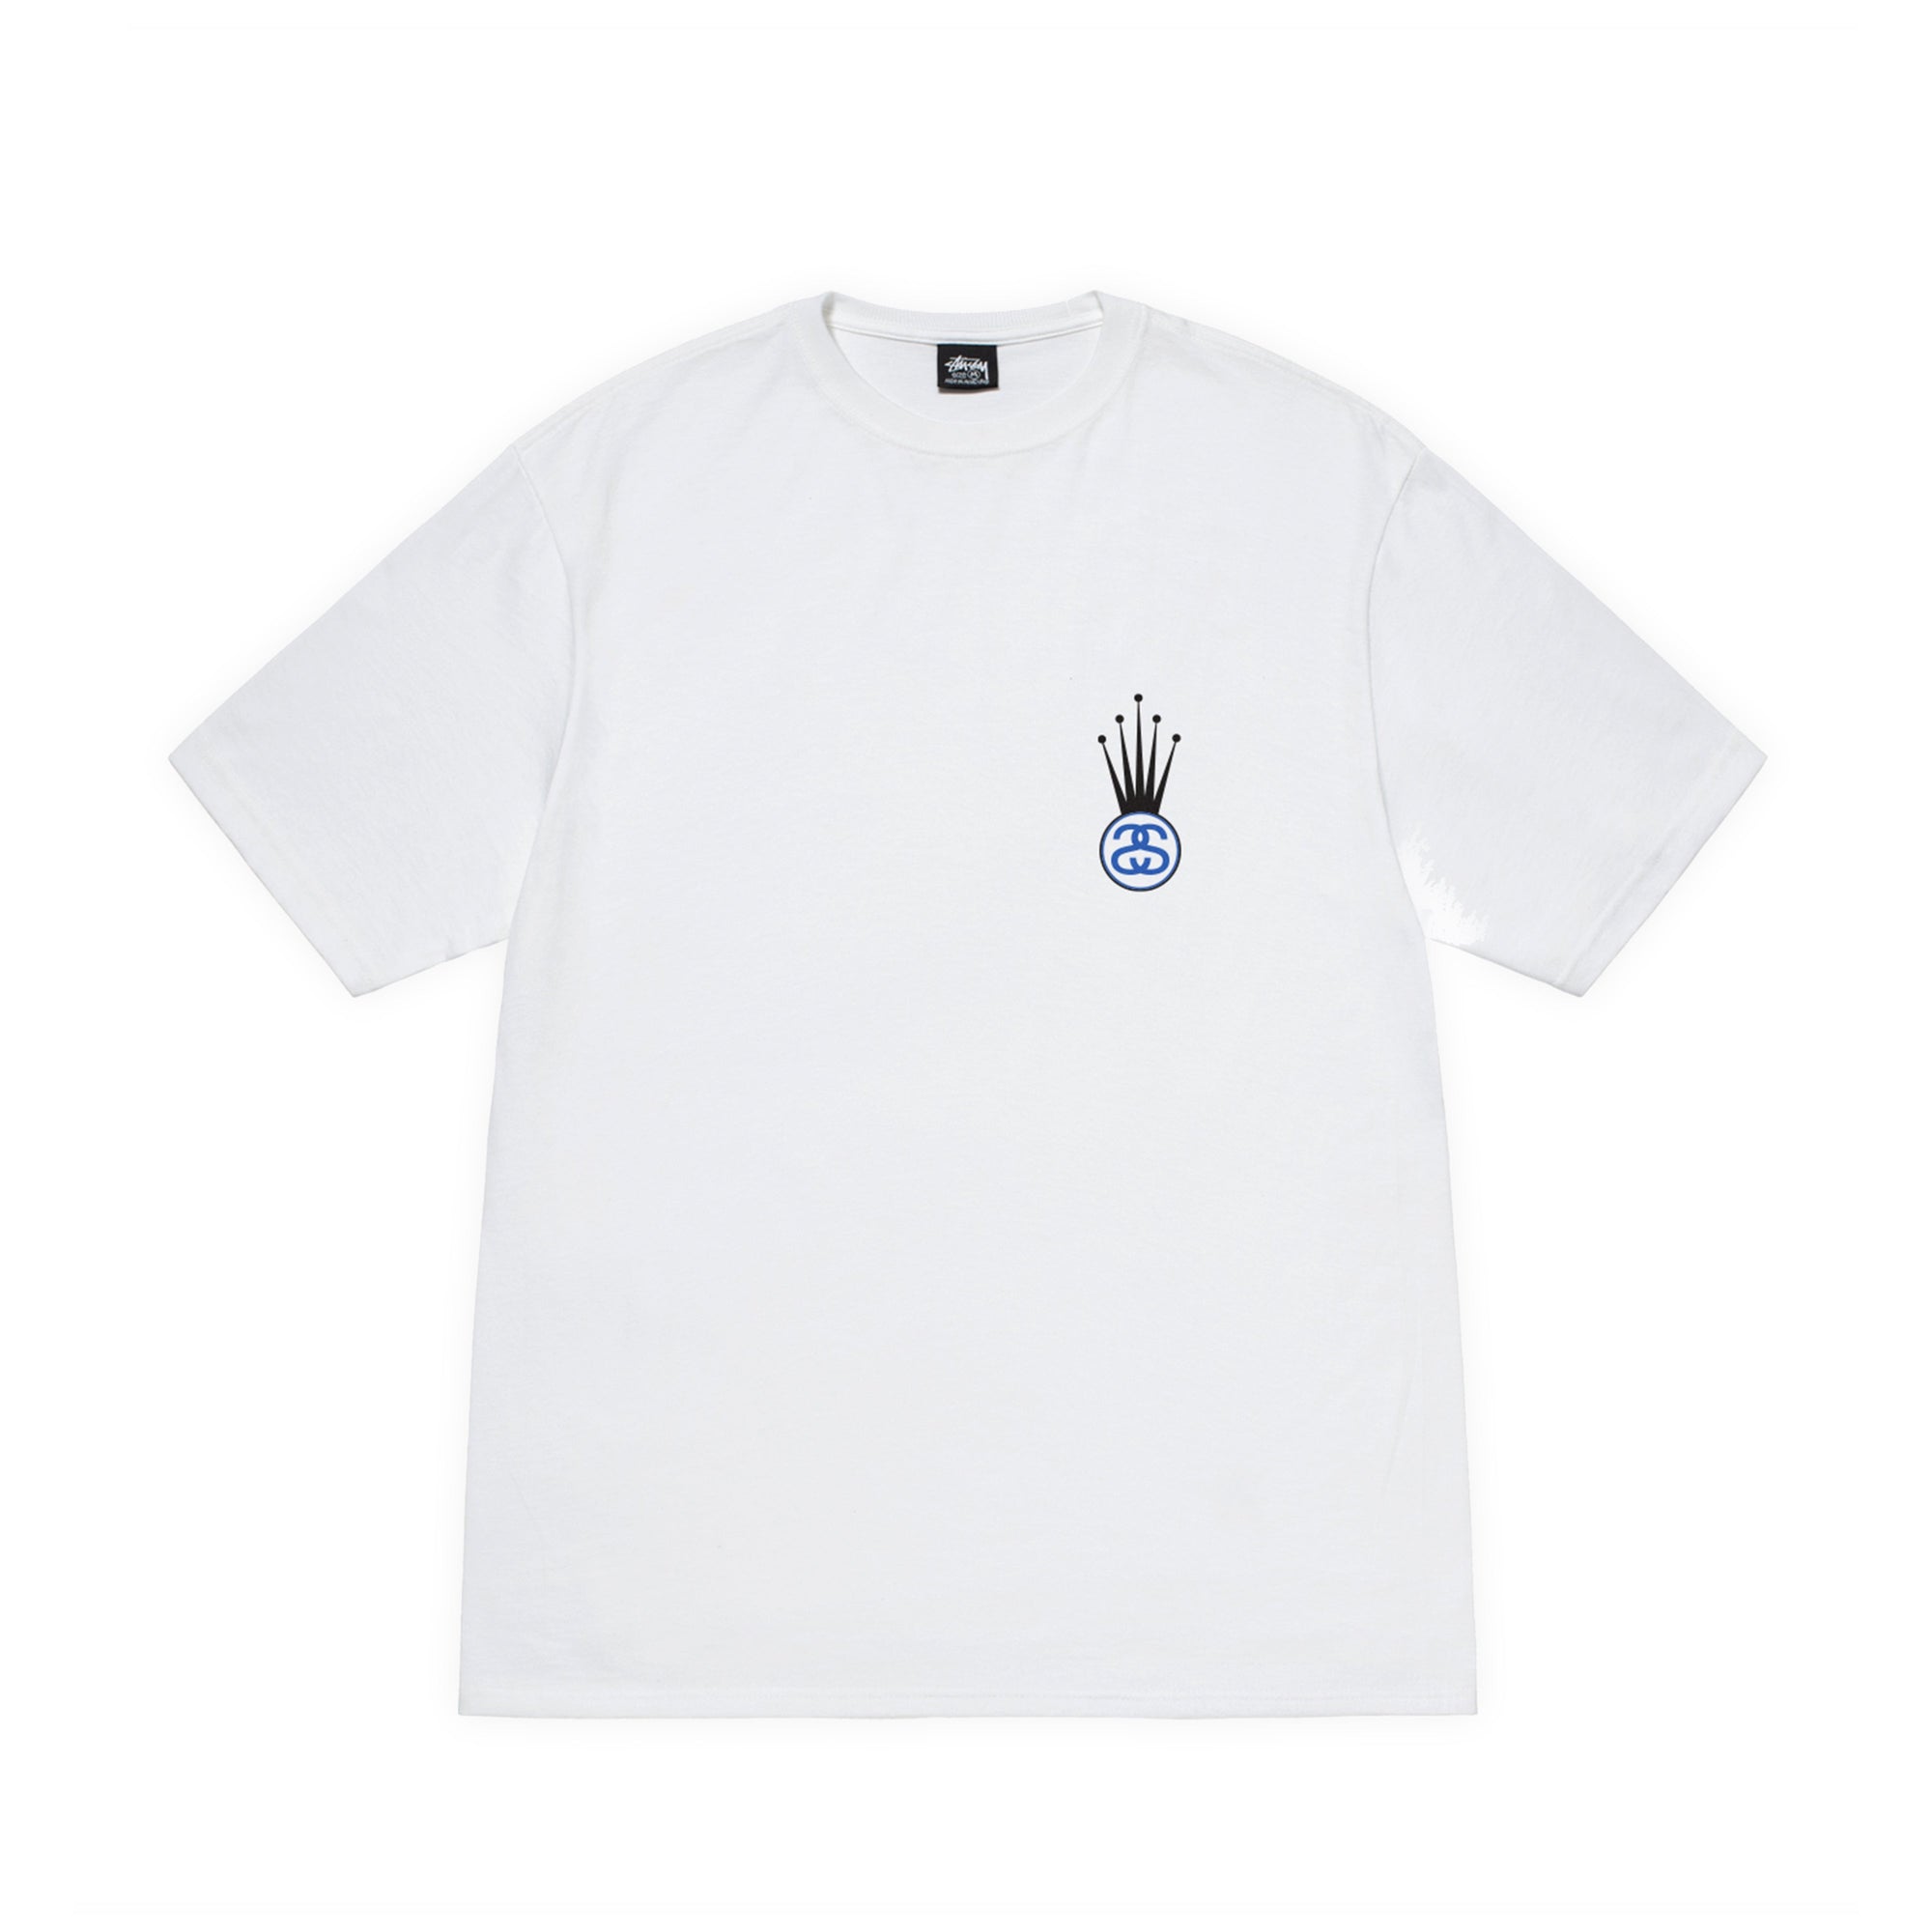 Stüssy - Crown Link Tee - (White) view 2